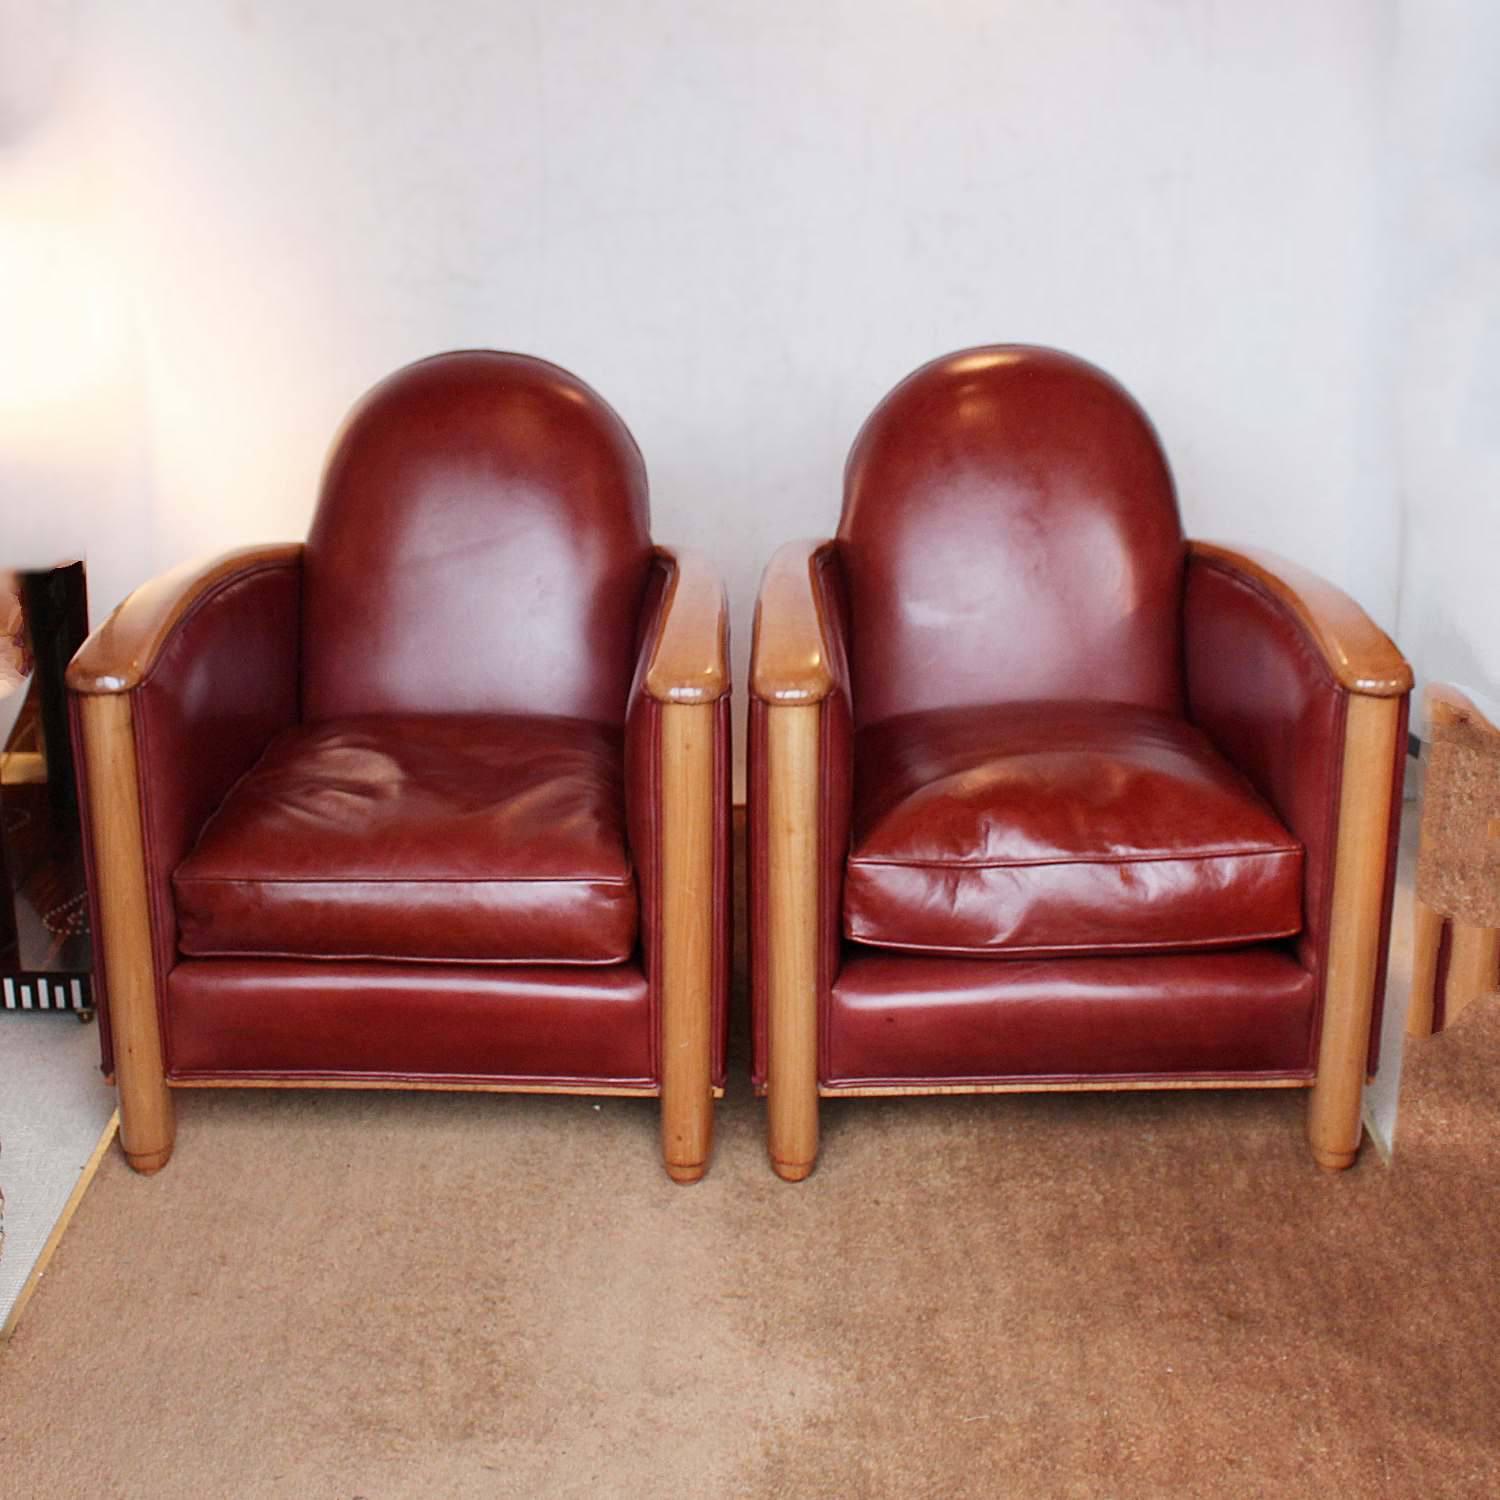 A pair of Art Deco chairs. fruitwood arms and legs, upholstered in chestnut leather.